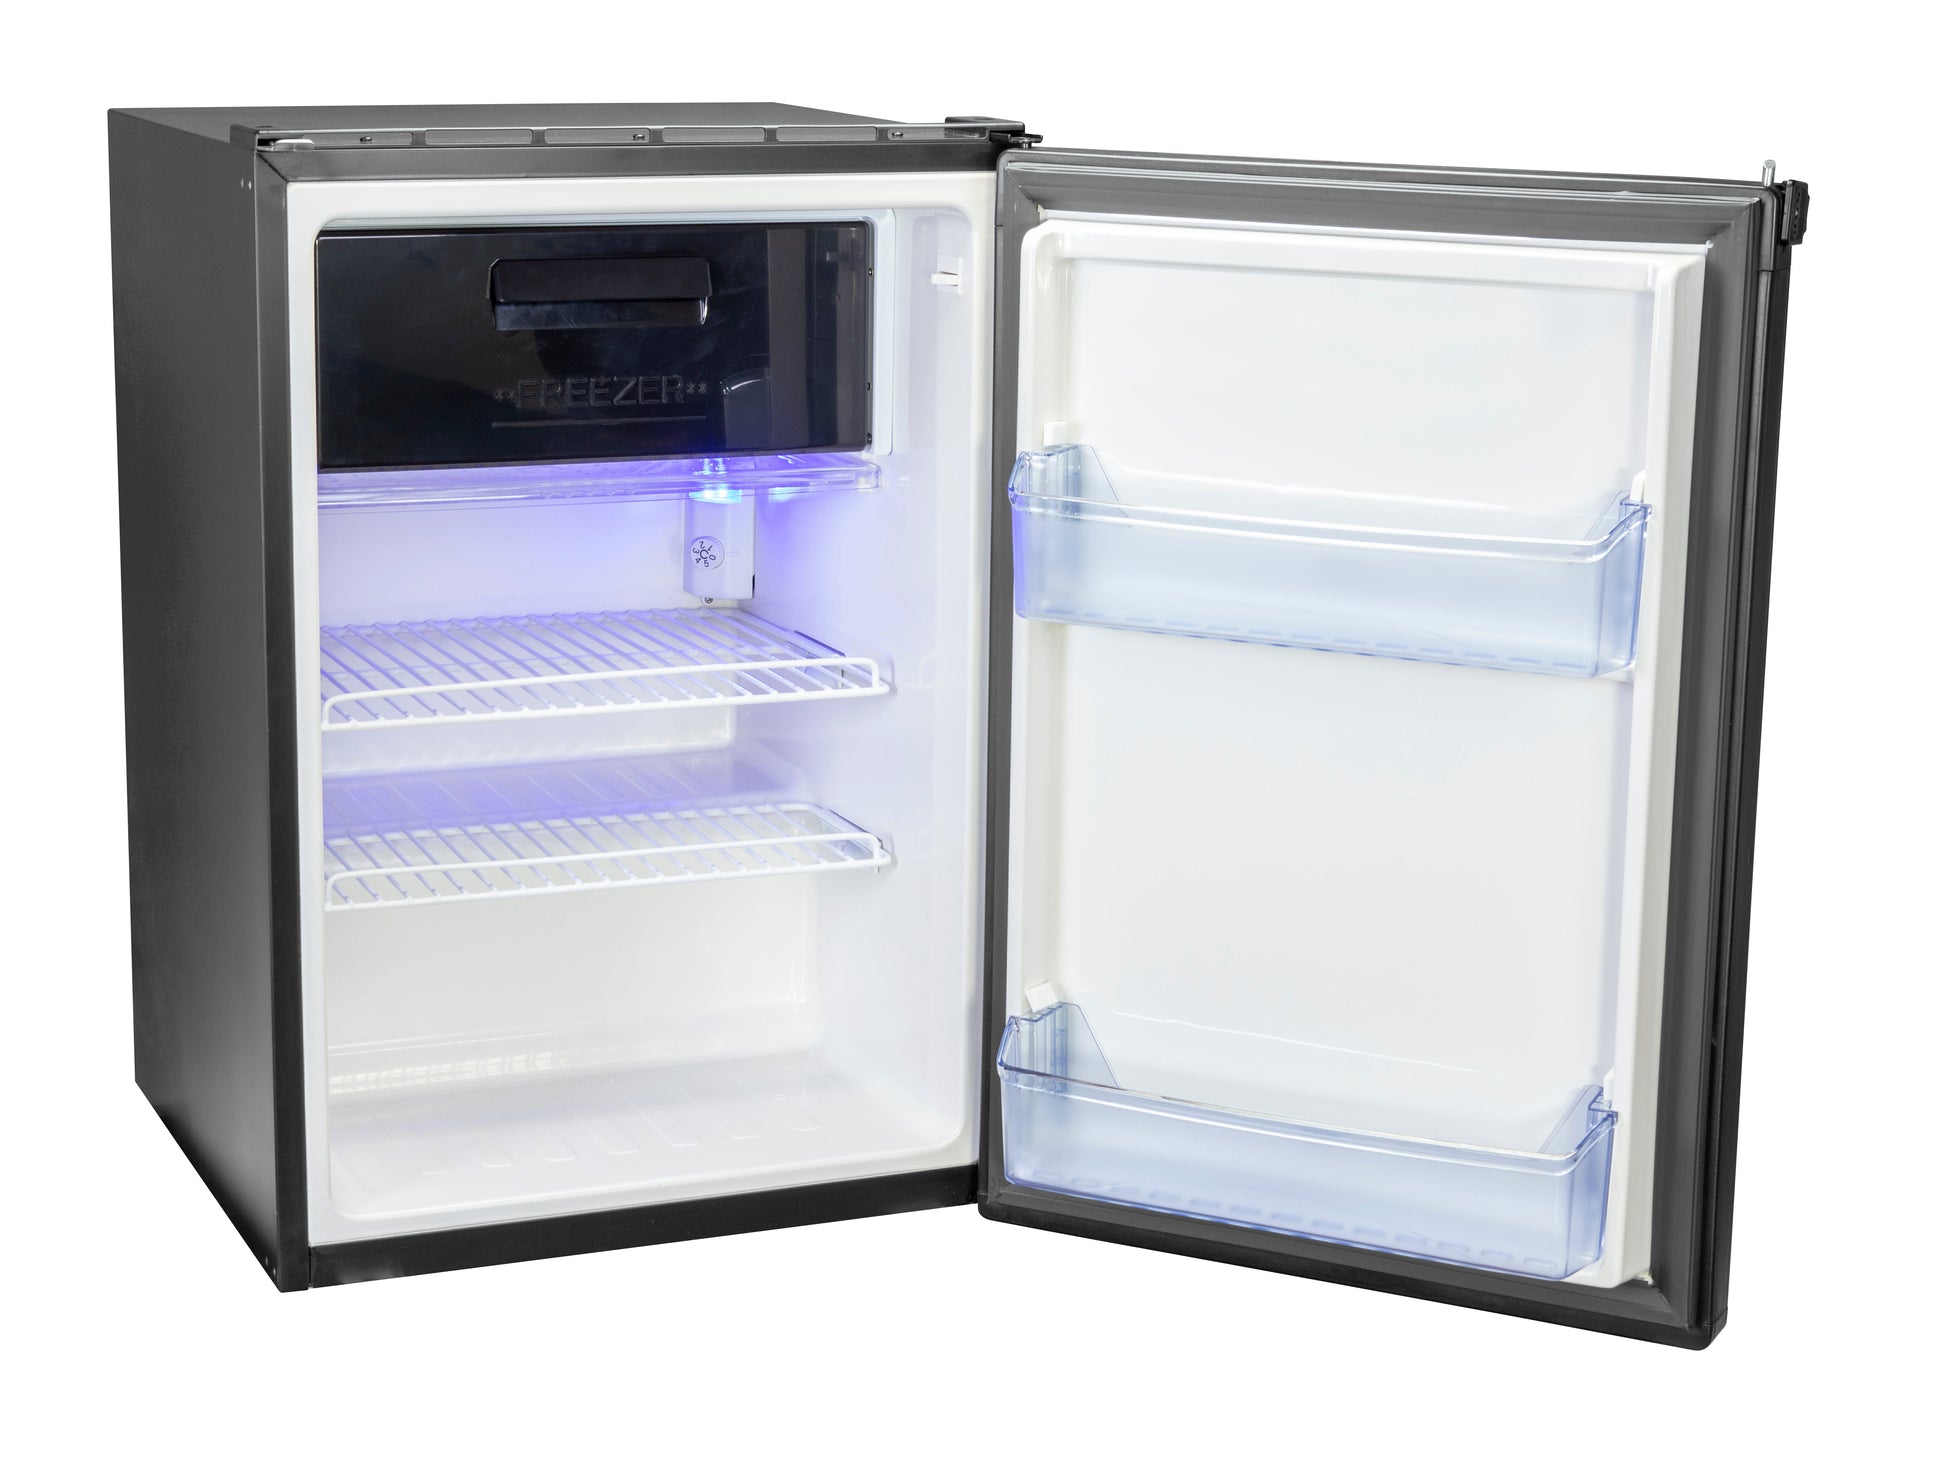 Norcold DE105 Single Compartment Refrigerator With Freezer - N6DDE105